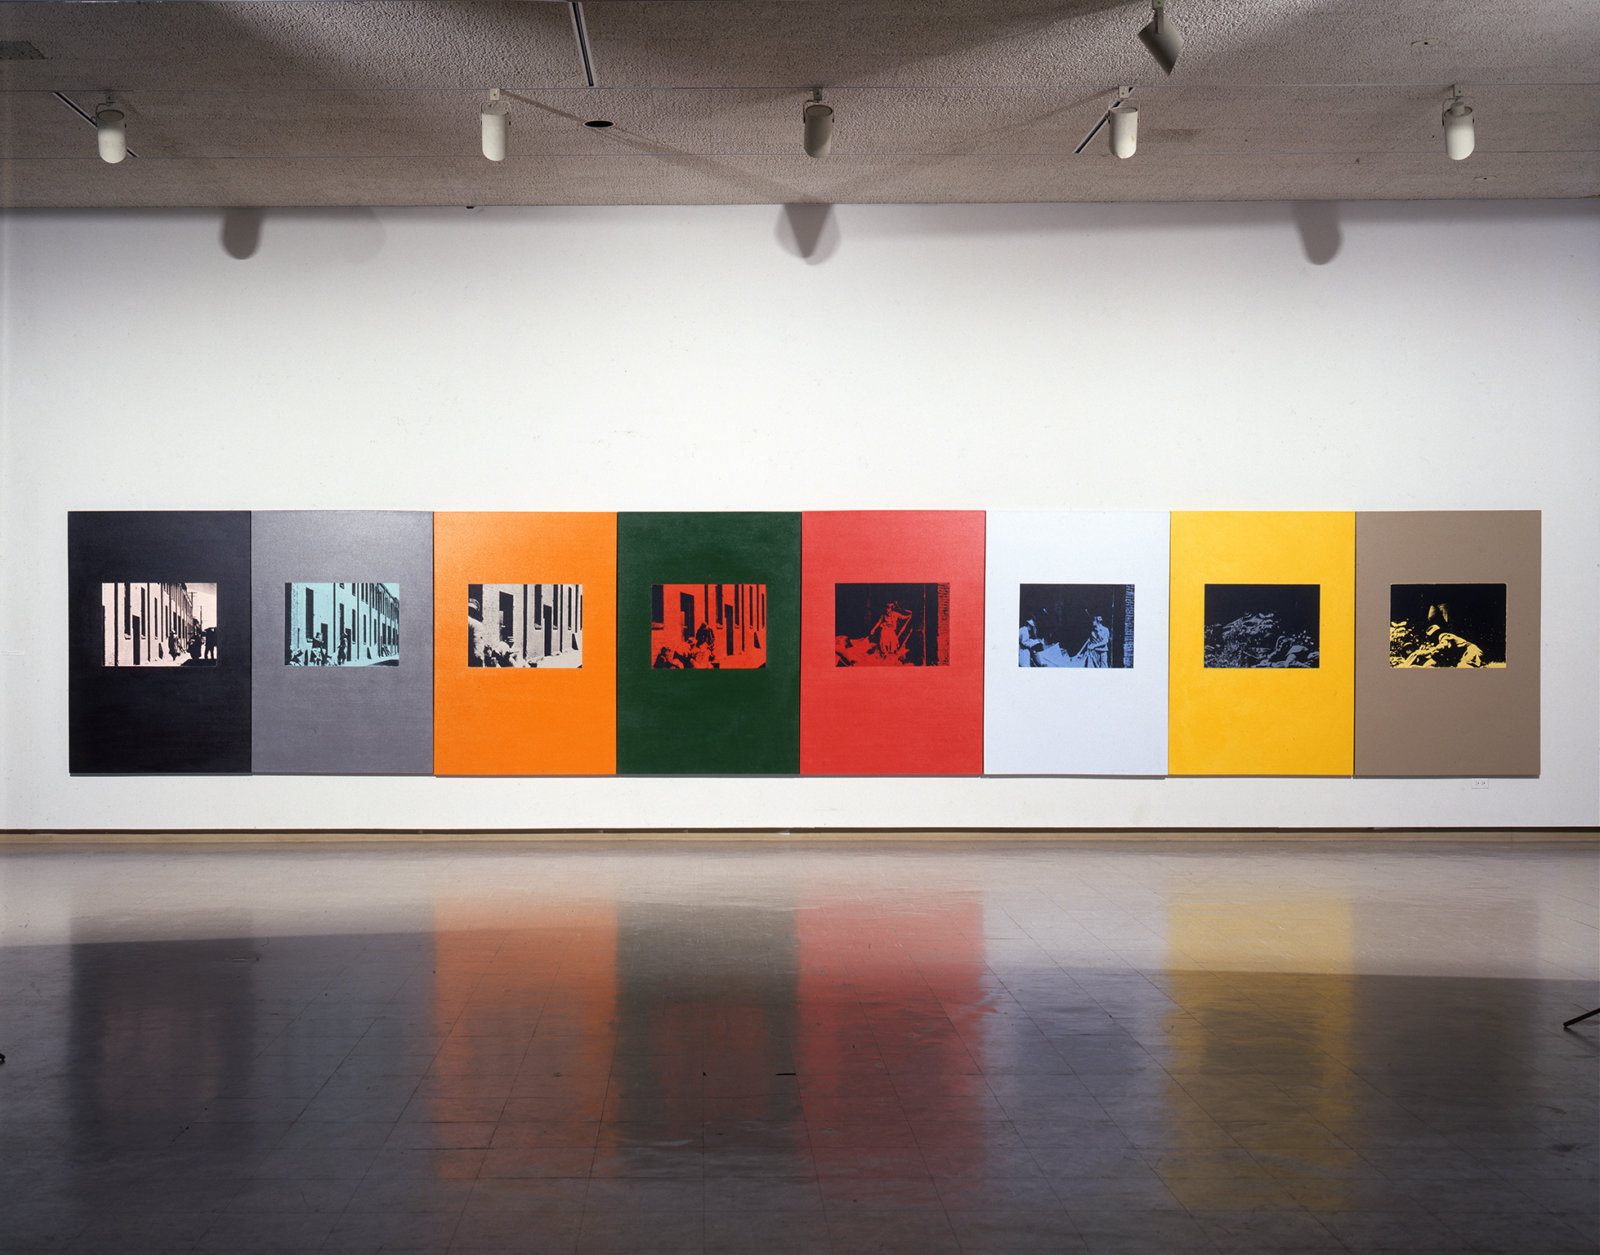 Ian Wallace, Poverty 1982, 1982, oil-based silkscreen over acrylic paint on canvas, 8 panels, 71 x 376 in. (180 x 955 cm)